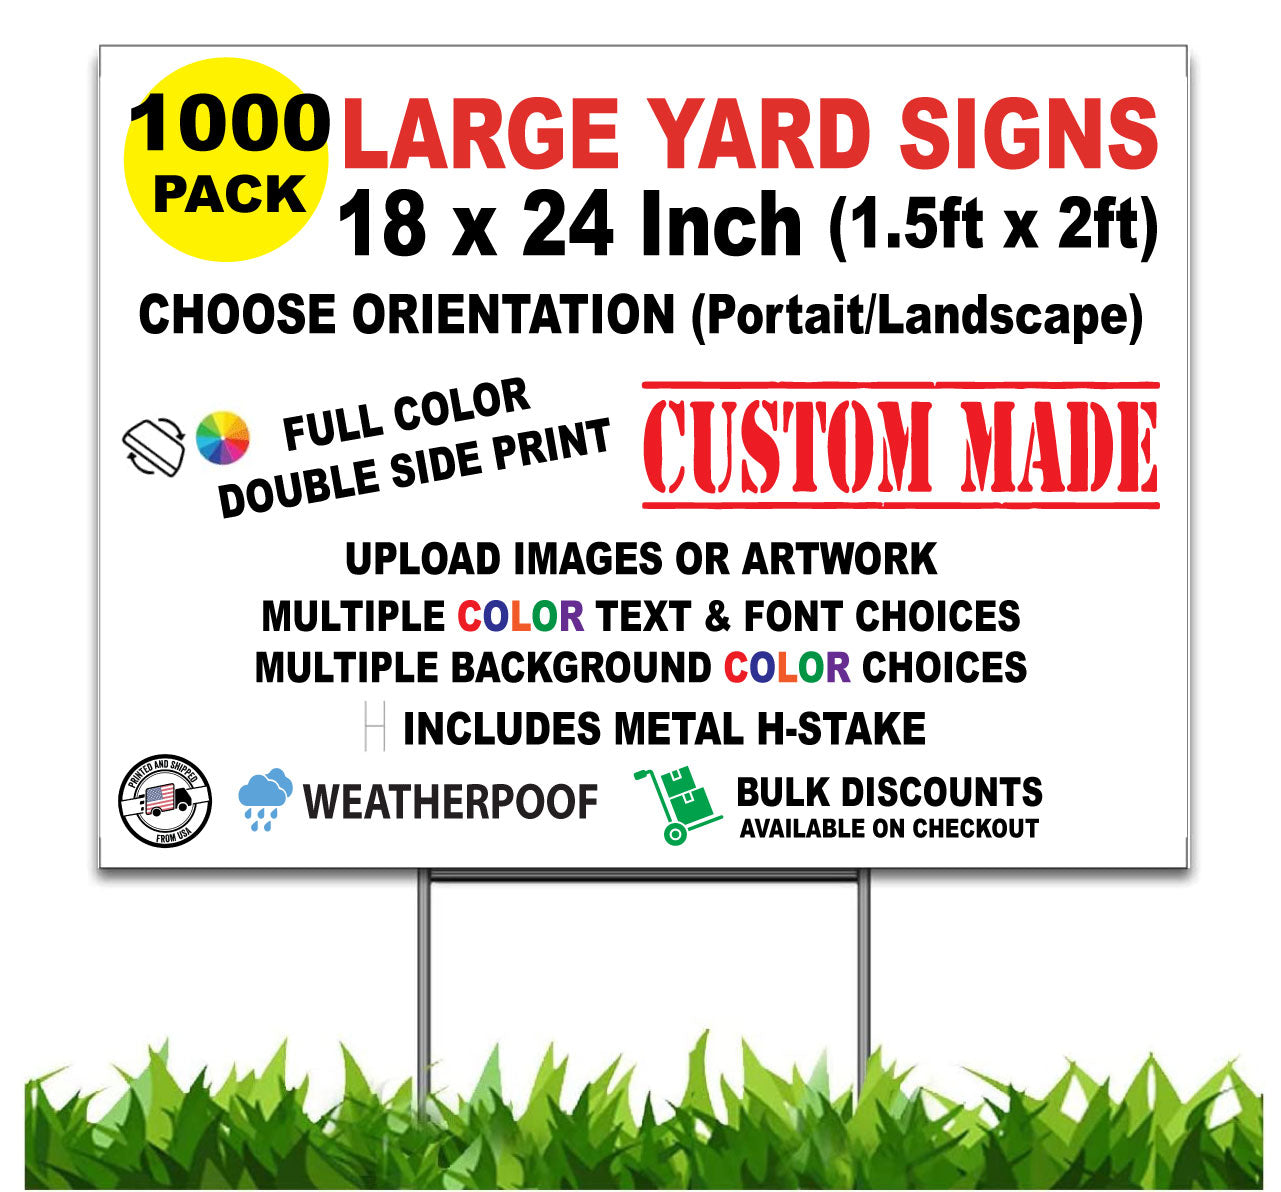 Custom Yard Signs, 1000 Pack (QTY1000), Personalize Yard Sign, 24 x 18 inch, Double Sided, H-Stake Included